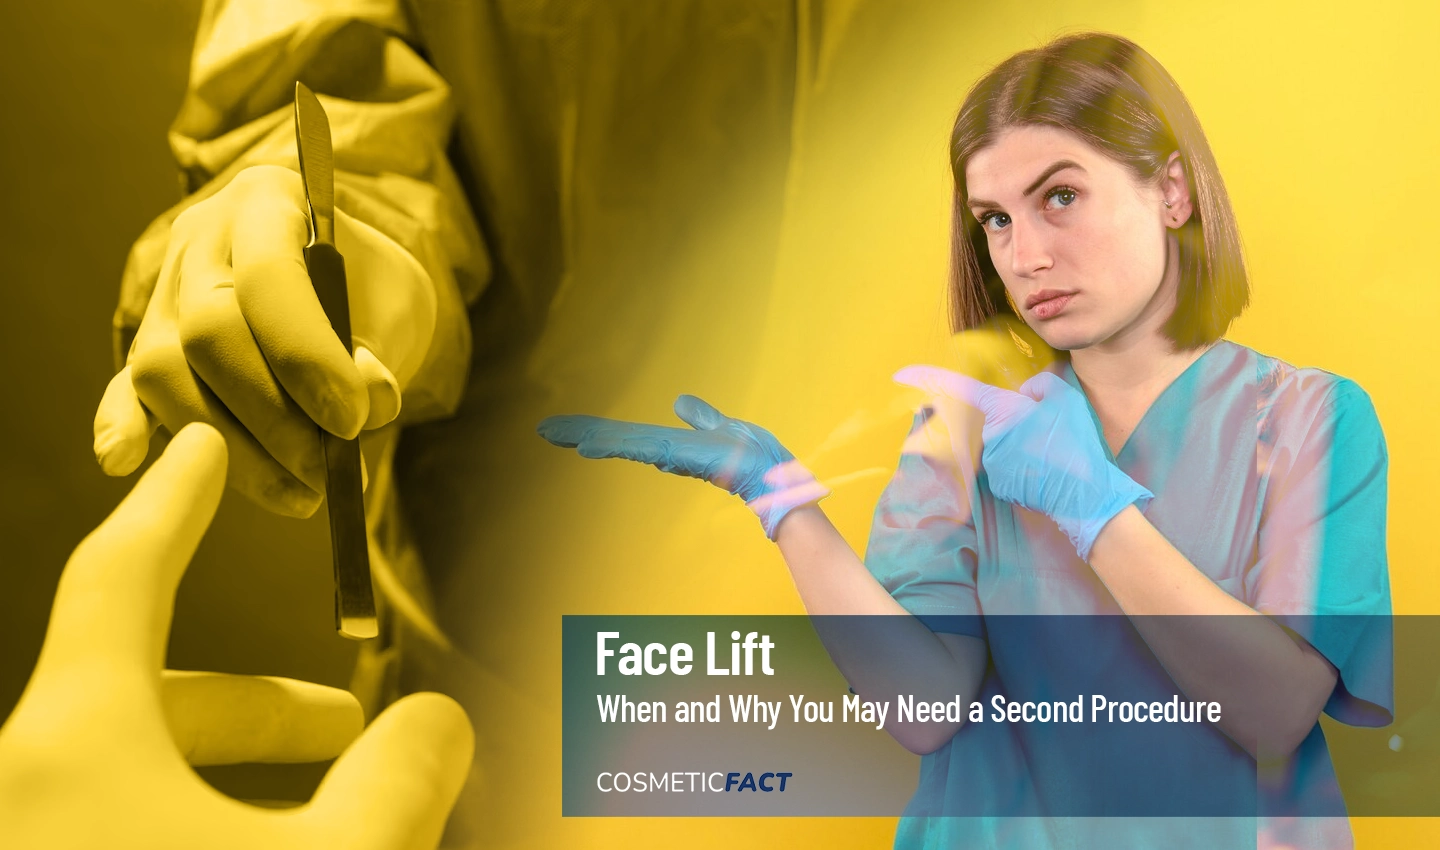 Image of a woman holding a surgical cutter with a sad expression, representing the topic of revision facelift surgery and the possible need for a second procedure.